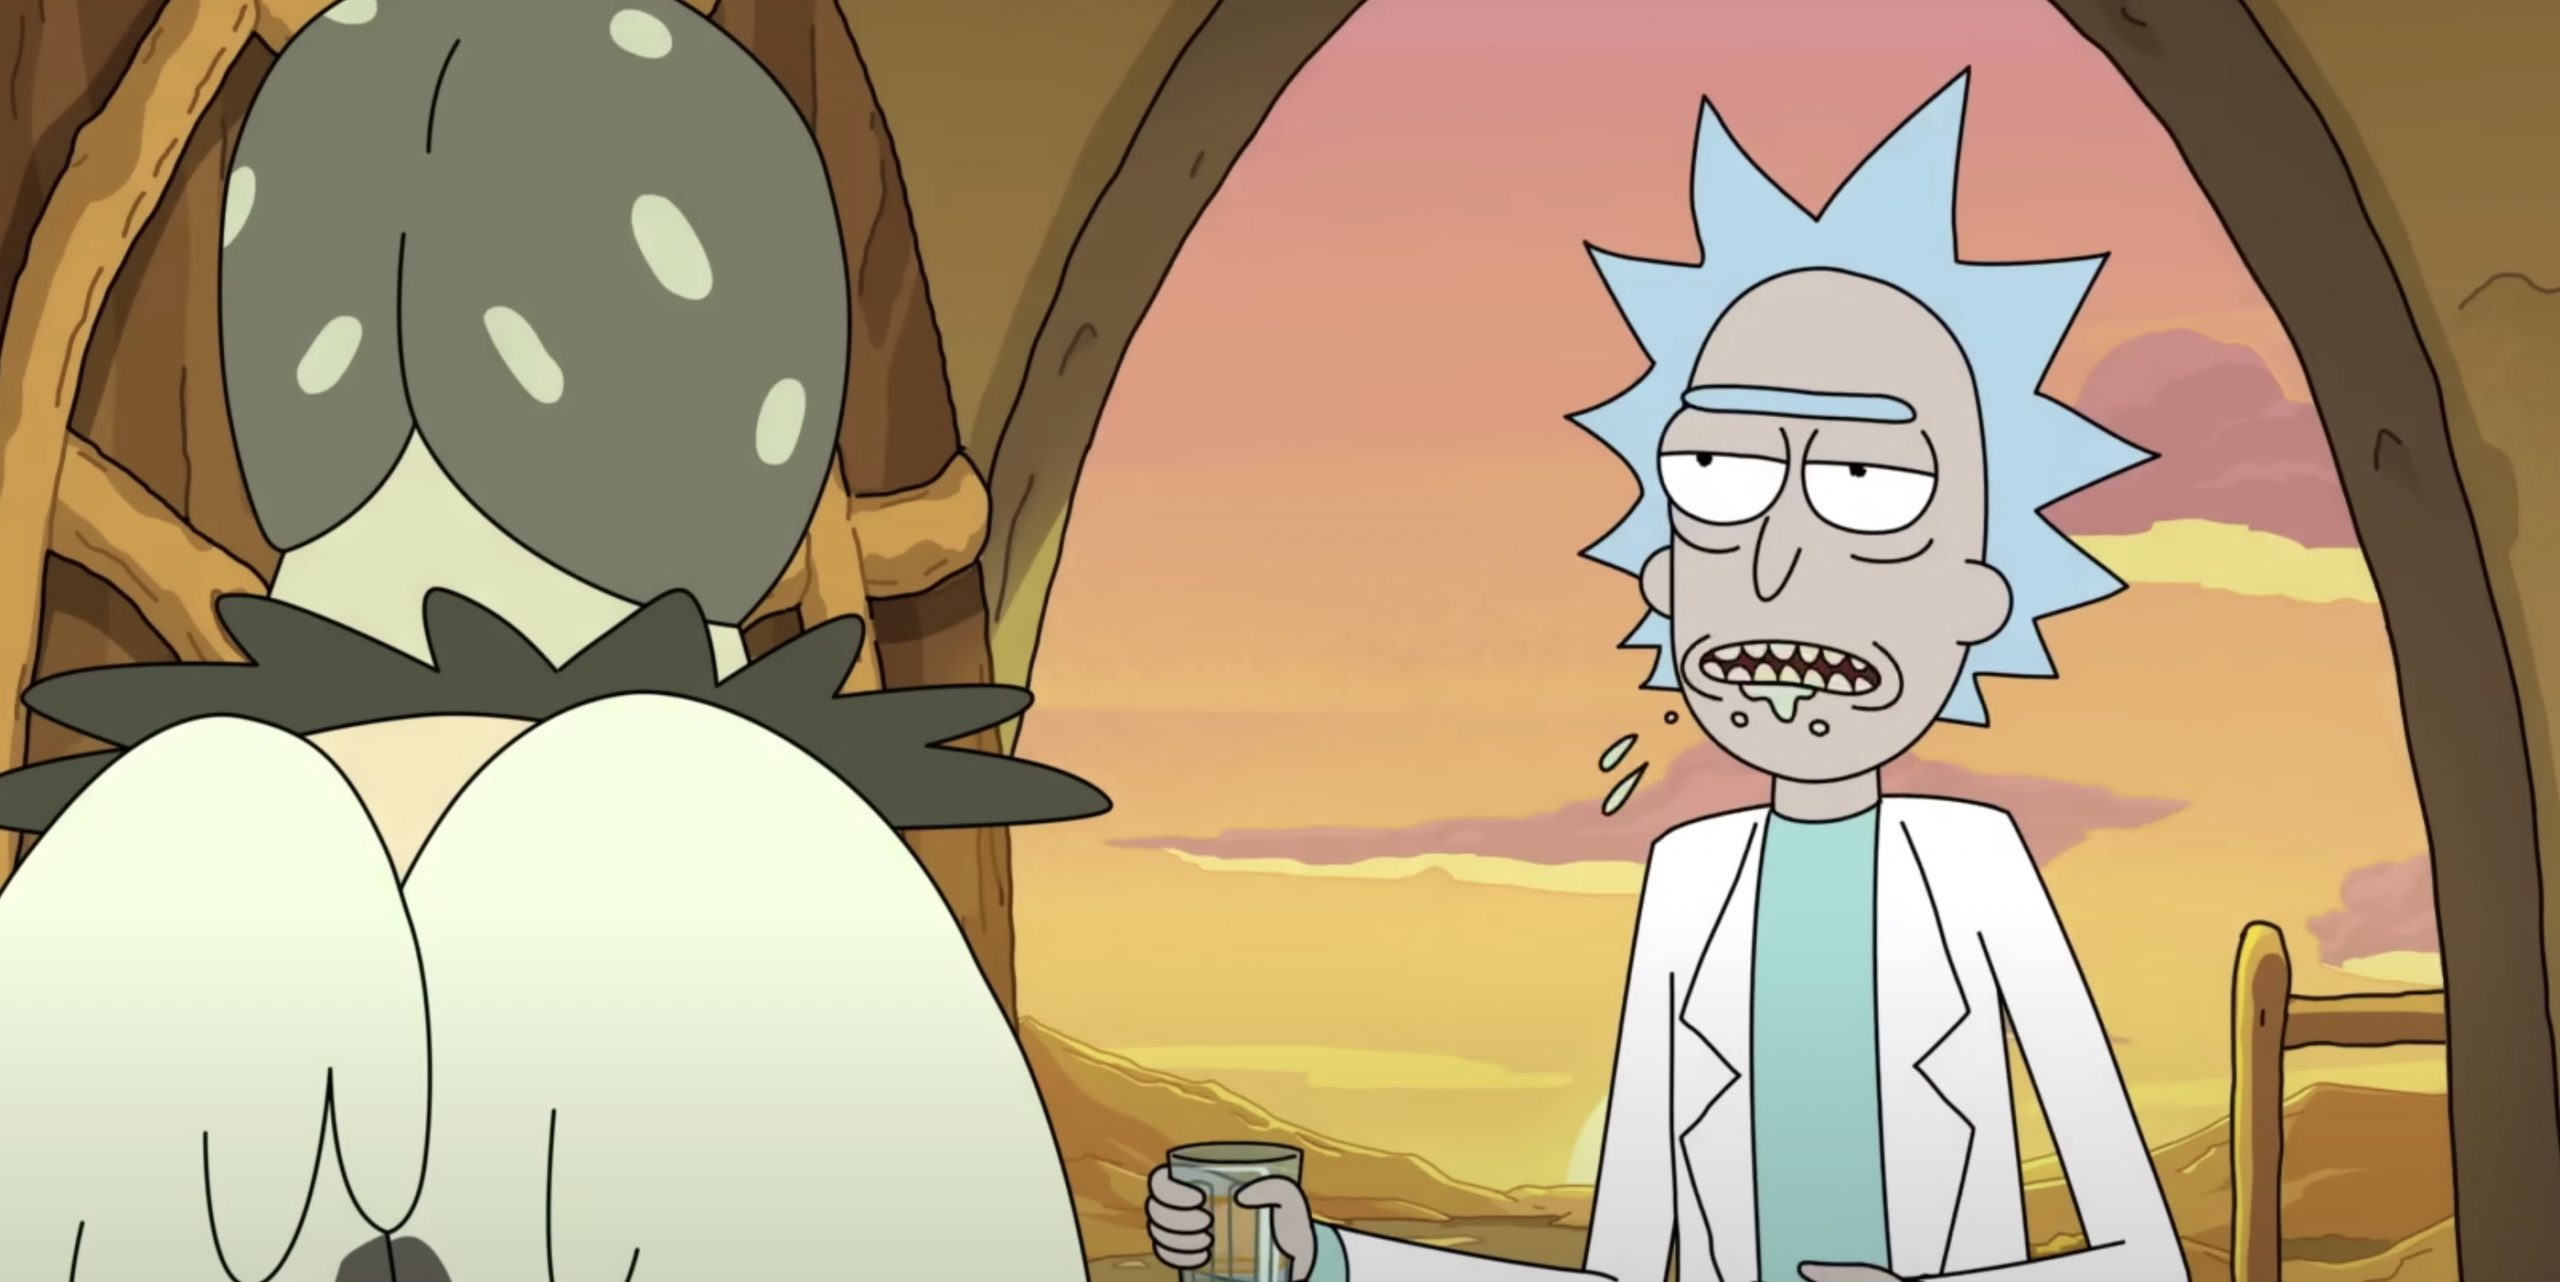 Rick and Morty Season 7 Episode 1 release date